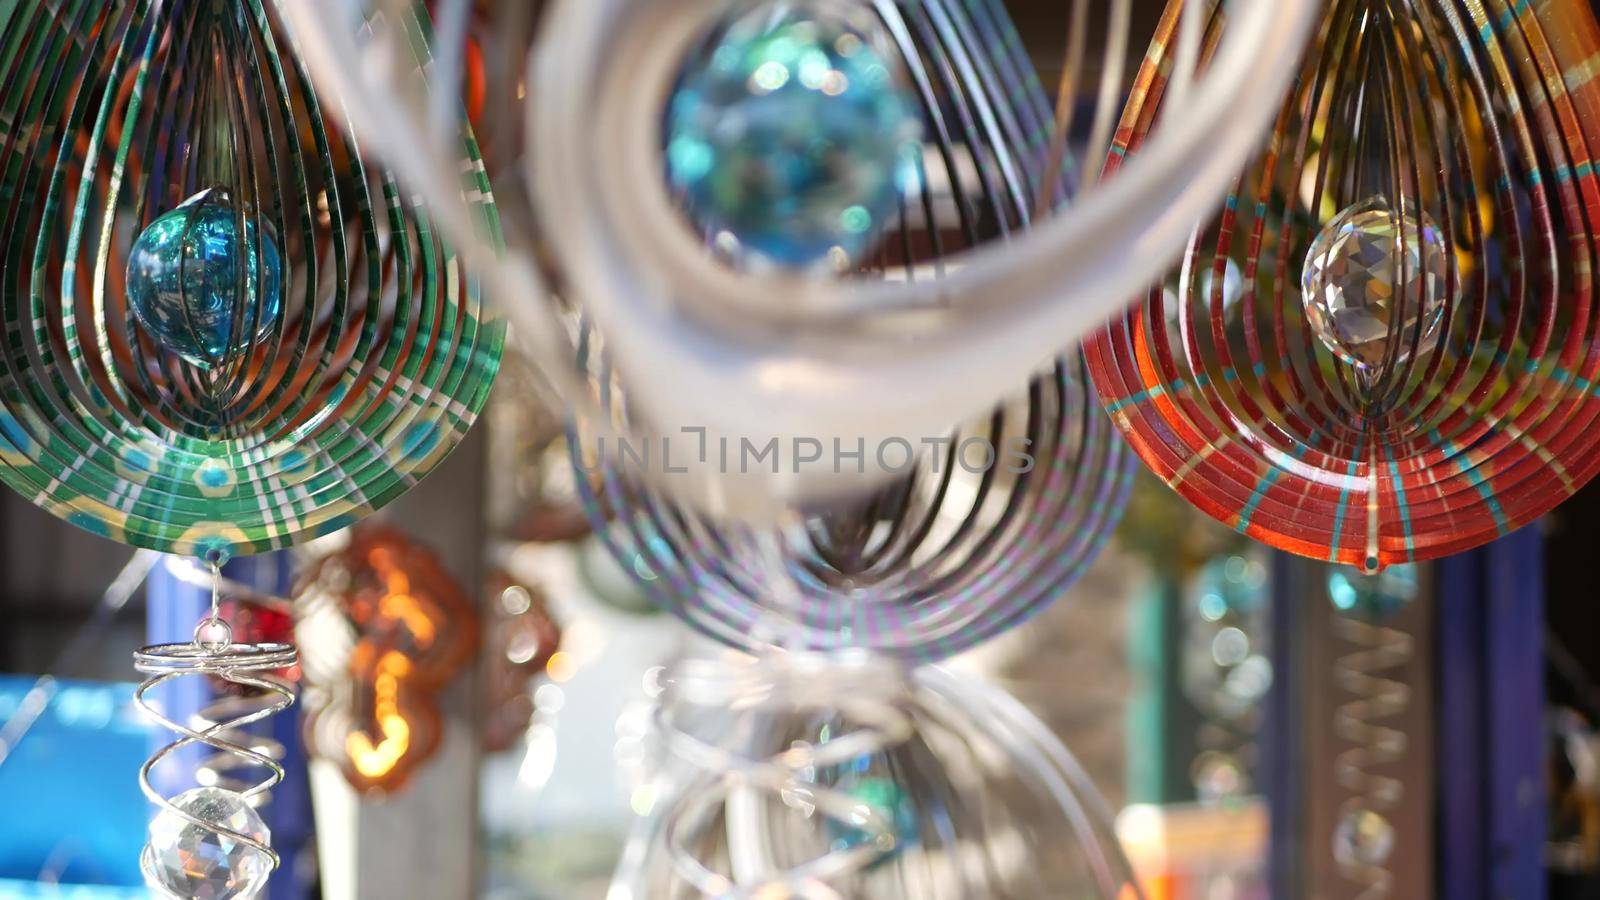 Colorful geometric metallic wind spinner, garden hypnotic surreal decoration, California USA. 3D kinetic rotating iridescent magnetic multi colored air spiral. Shimmering mesmerising optical illusion by DogoraSun